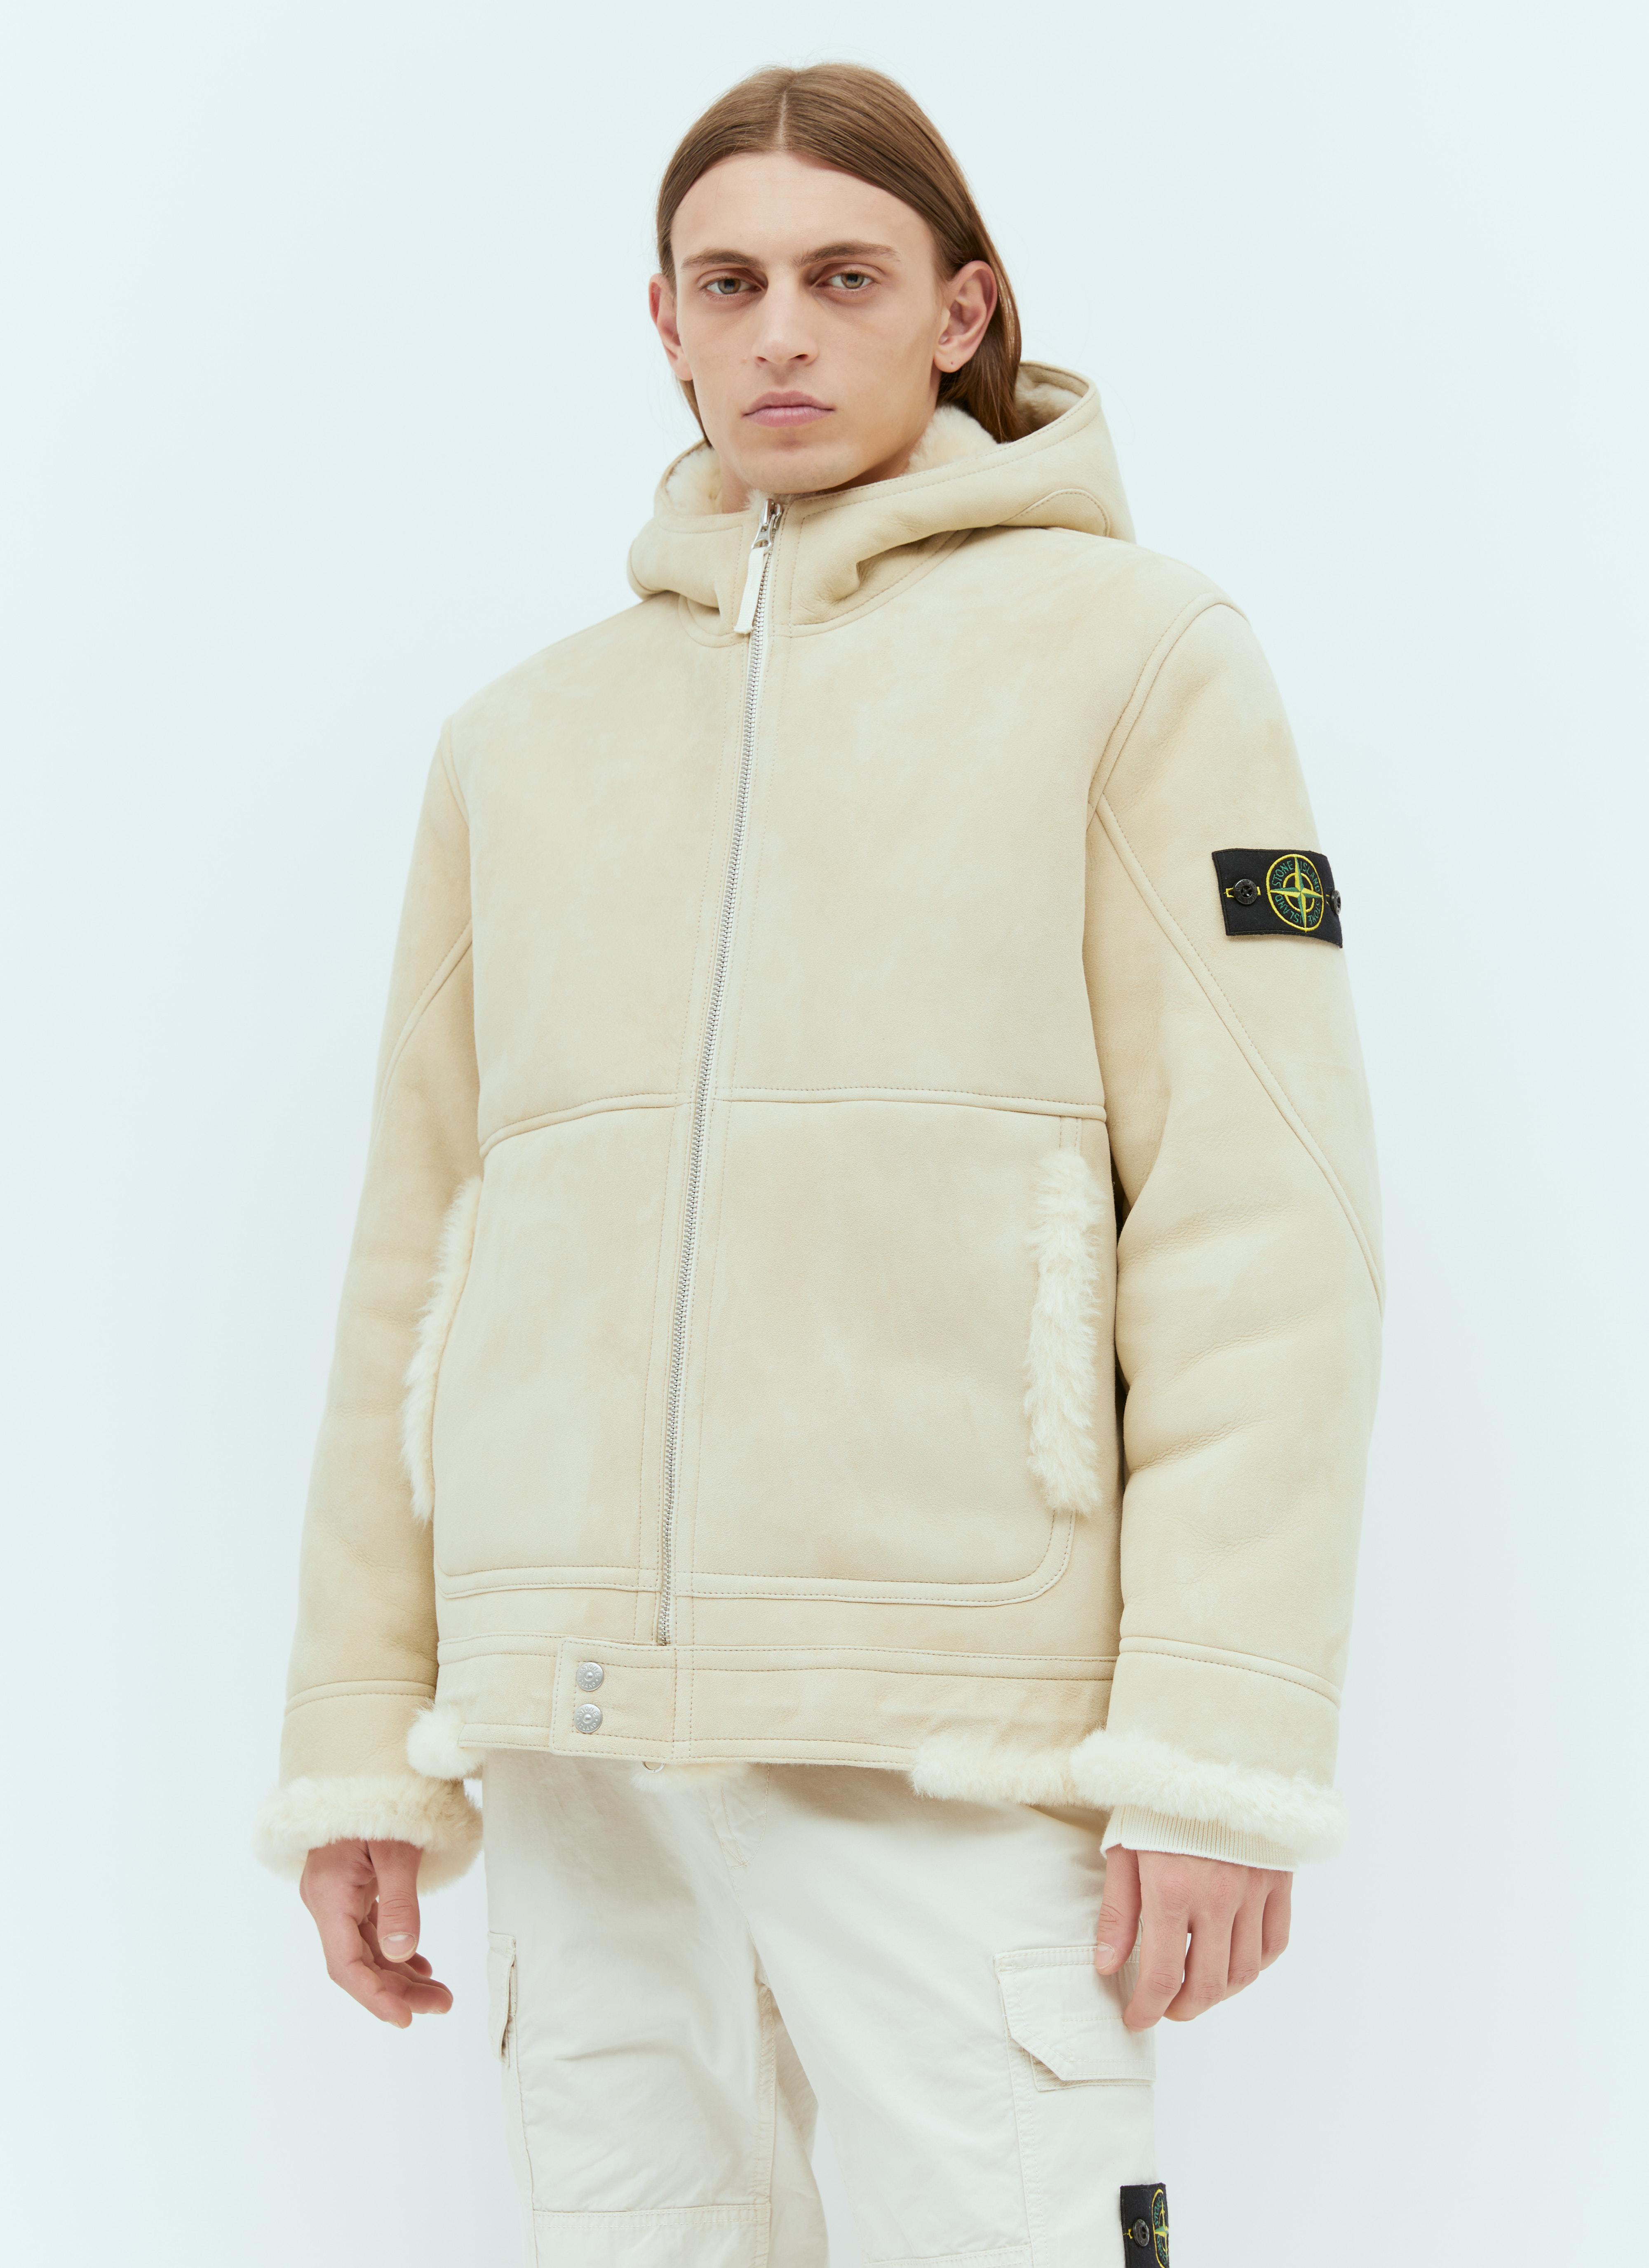 Stone Island Real Leather Blouson Jacket in Natural for Men | Lyst